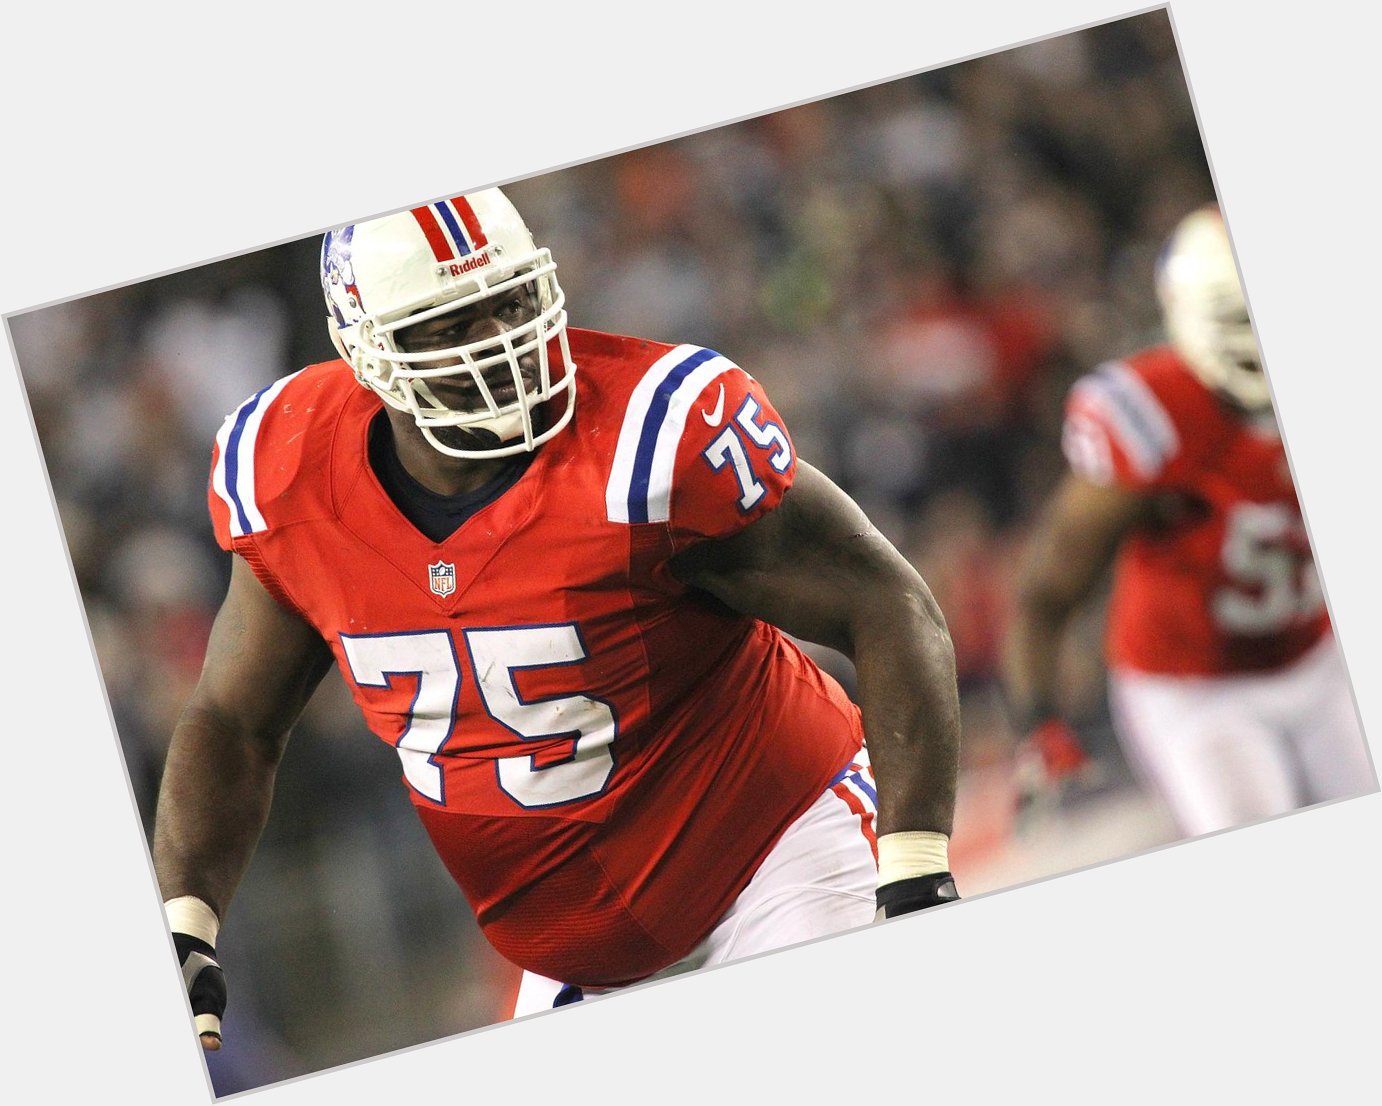 Happy Birthday to Vince Wilfork, who turns 33 today! 